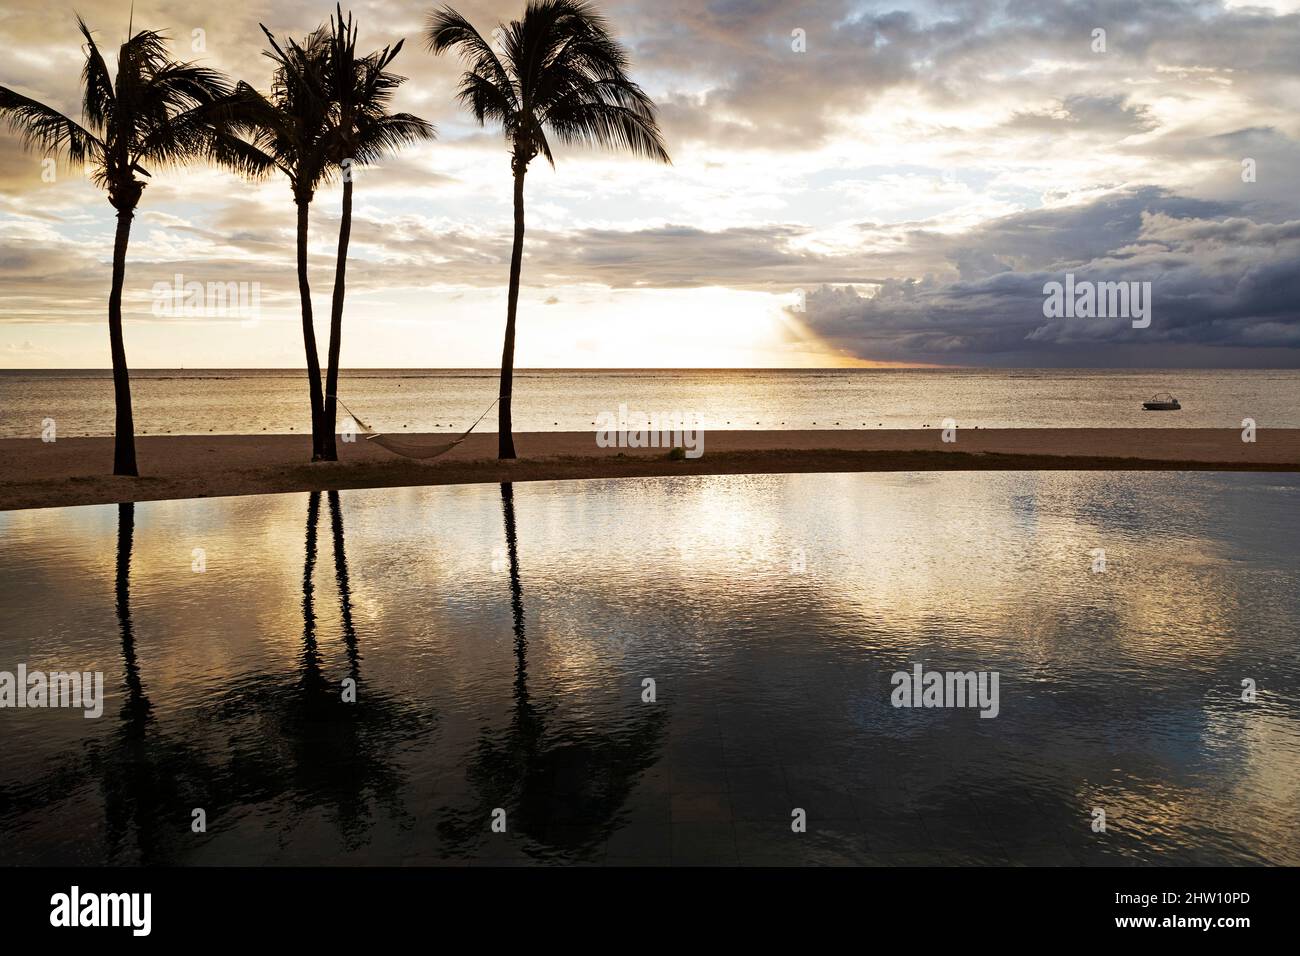 A hammock hangs from palm trees by an infinity pool by a beach at Flic en  Flac, Mauritius. Clouds gather offshore, over the Indian Ocean Stock Photo  - Alamy